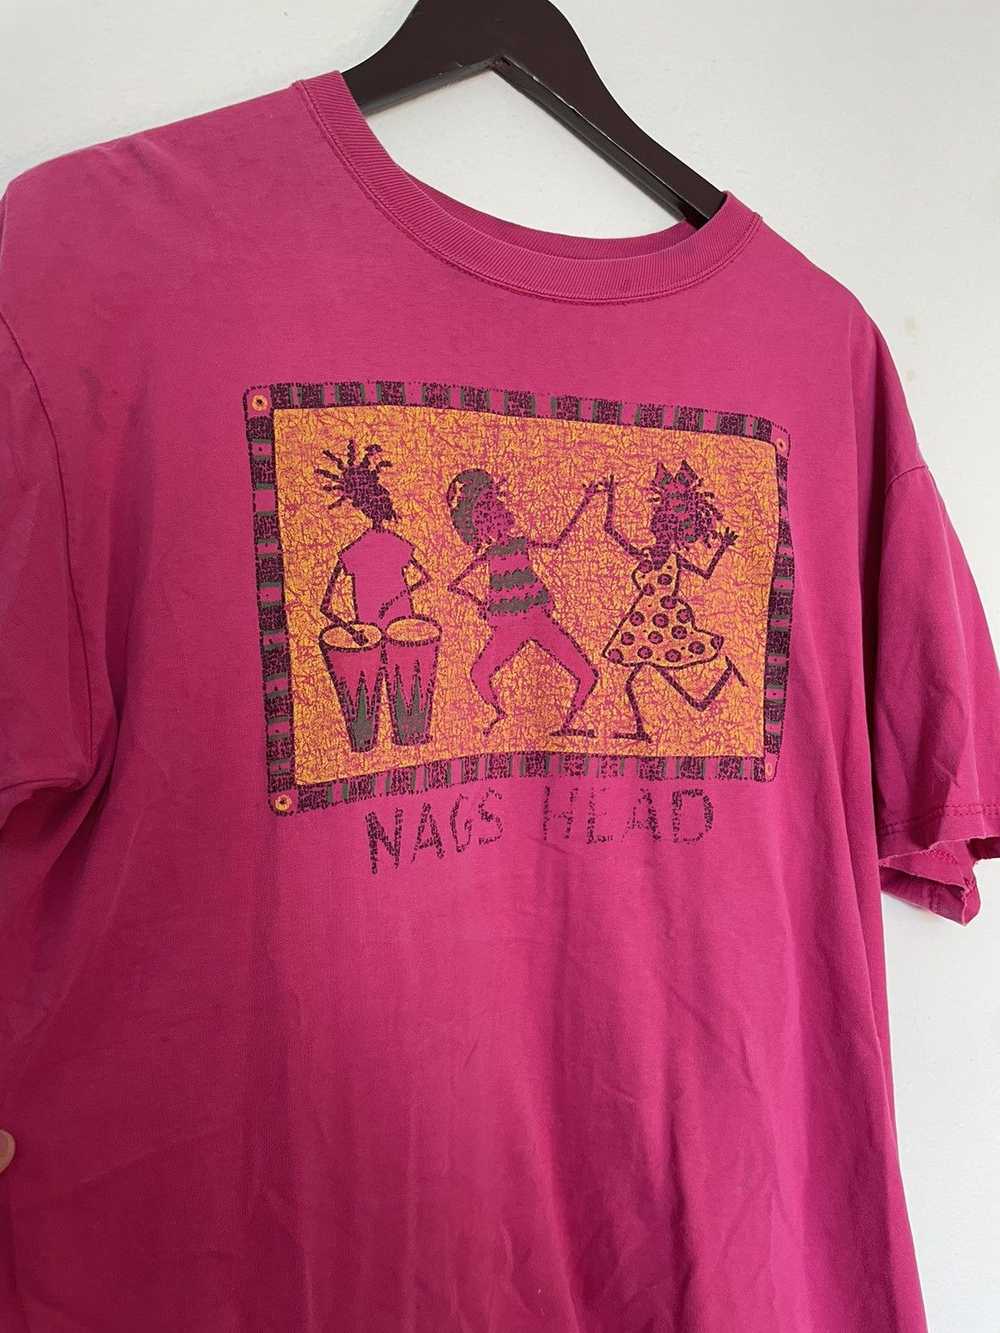 Jerzees Vintage 90s made in USA “nags head” grahi… - image 2